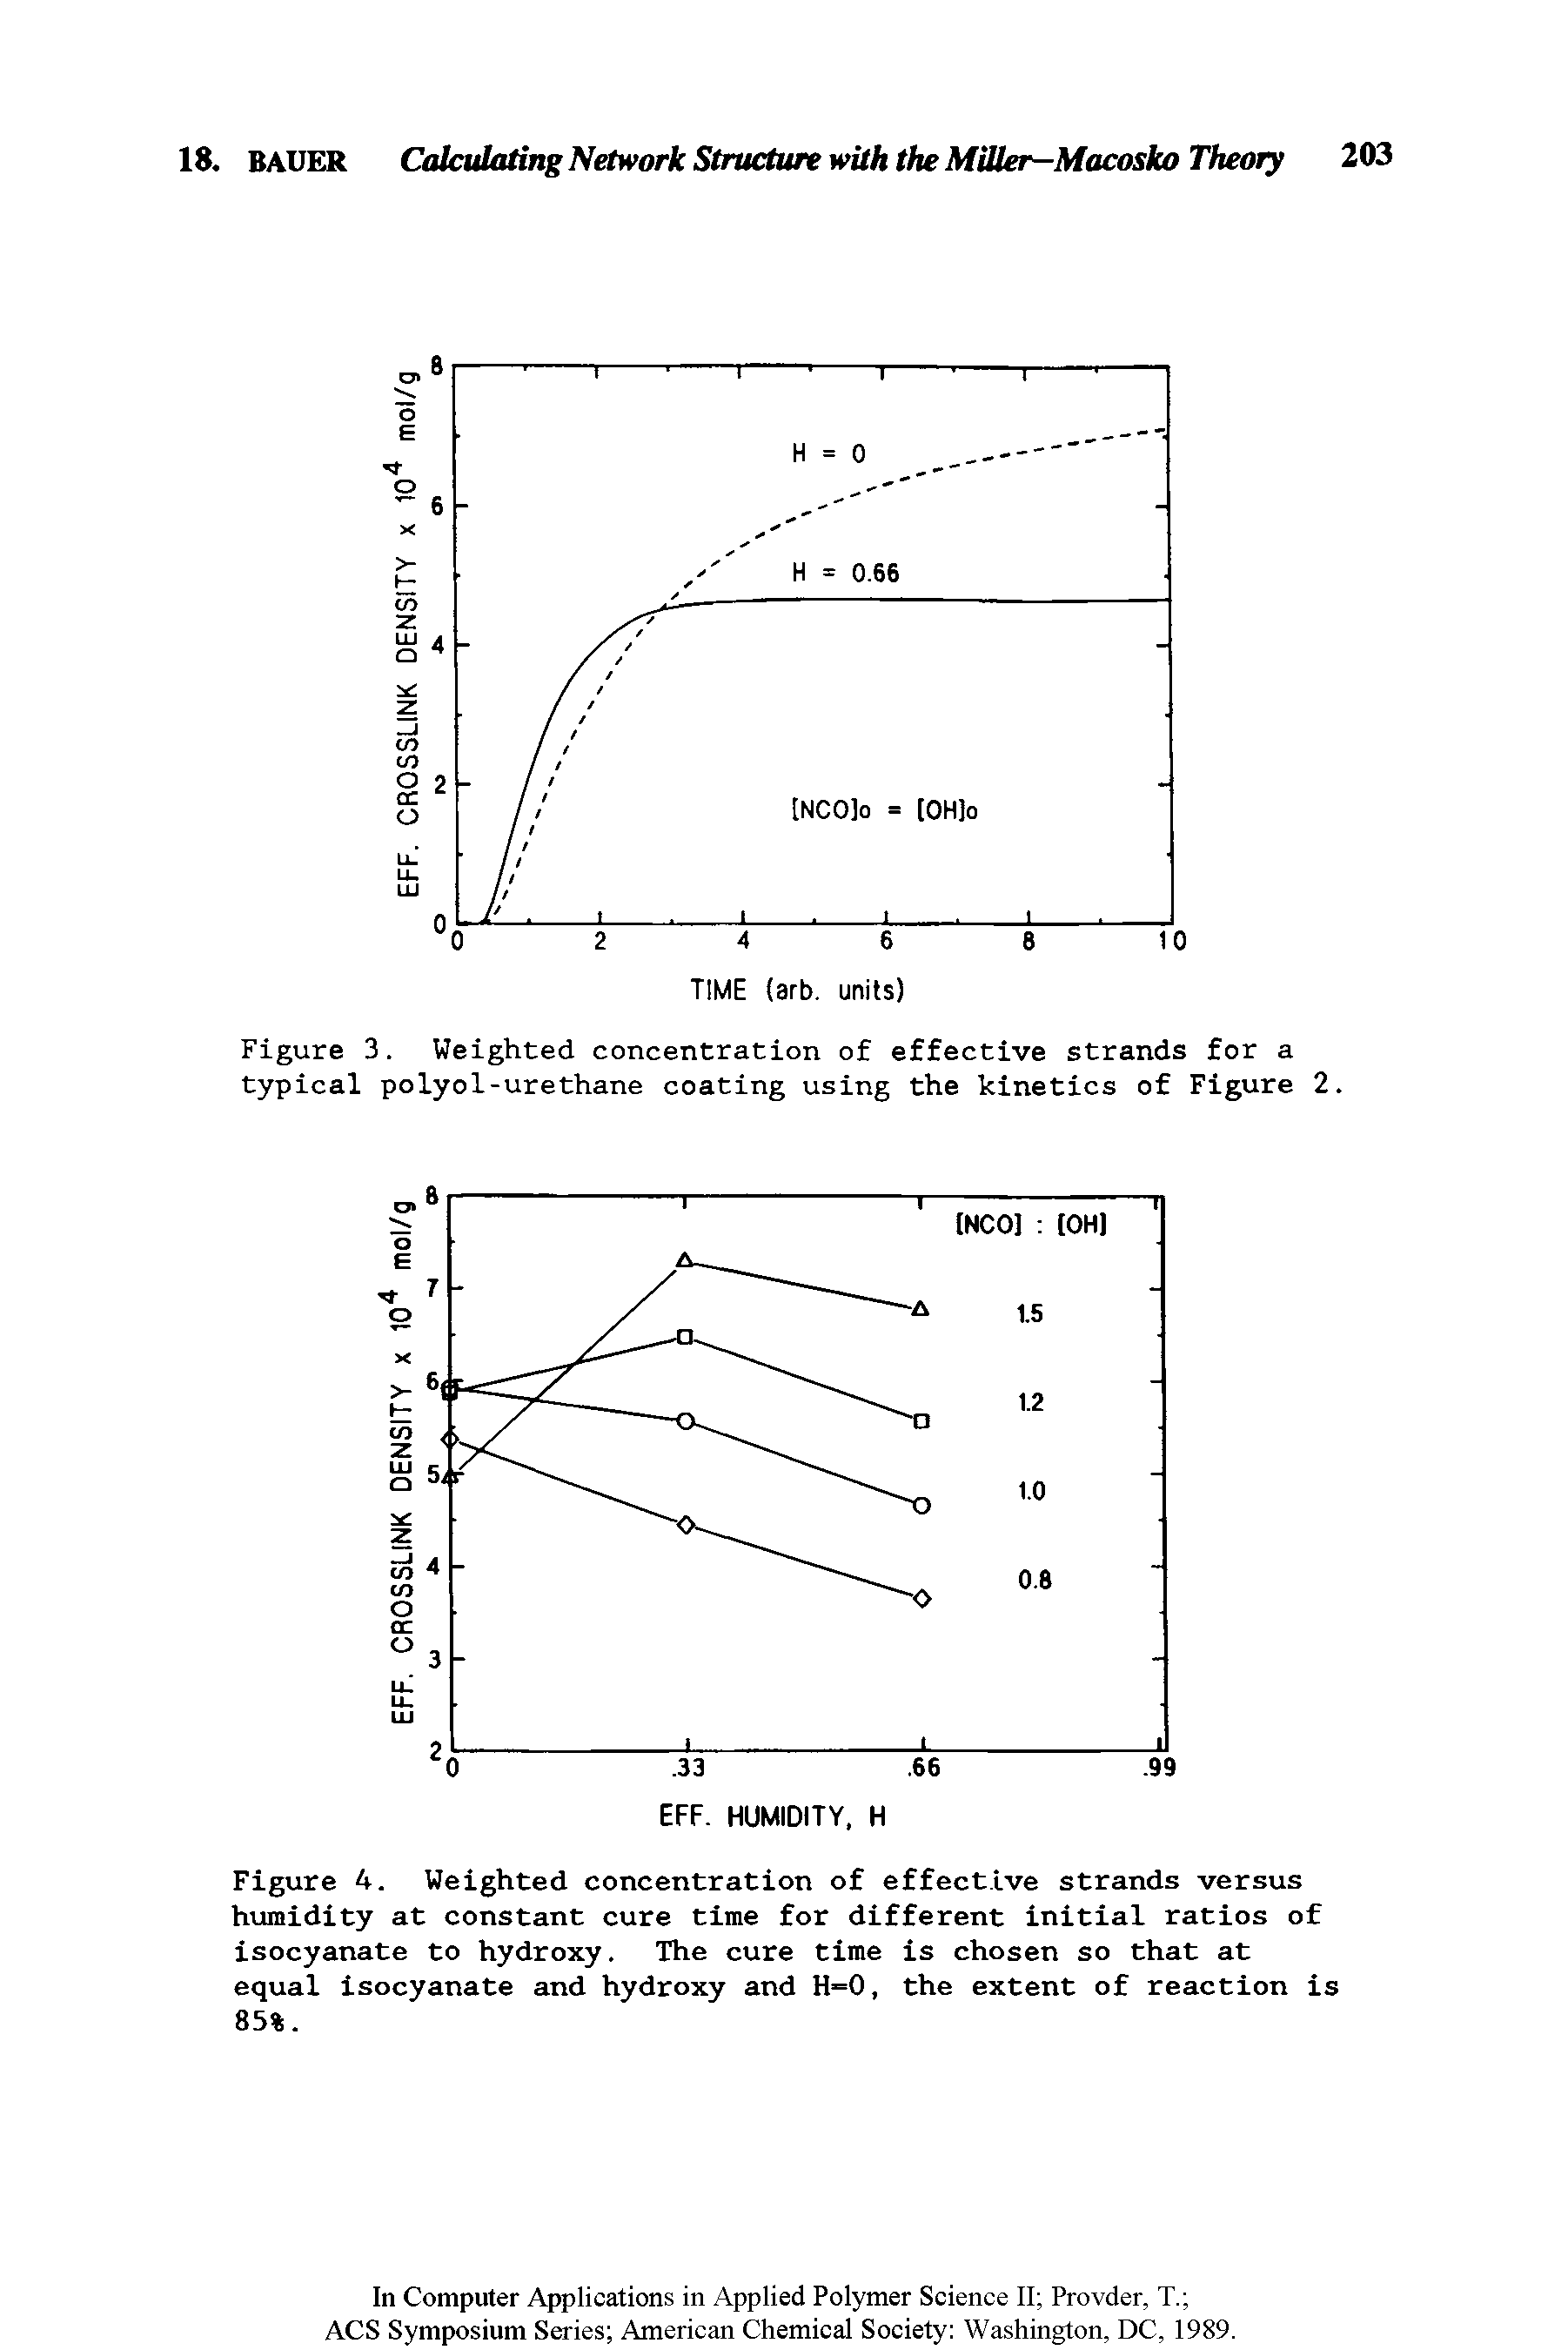 Figure 4. Weighted concentration of effective strands versus humidity at constant cure time for different initial ratios of isocyanate to hydroxy. The cure time is chosen so that at equal isocyanate and hydroxy and H=0, the extent of reaction is 85%.